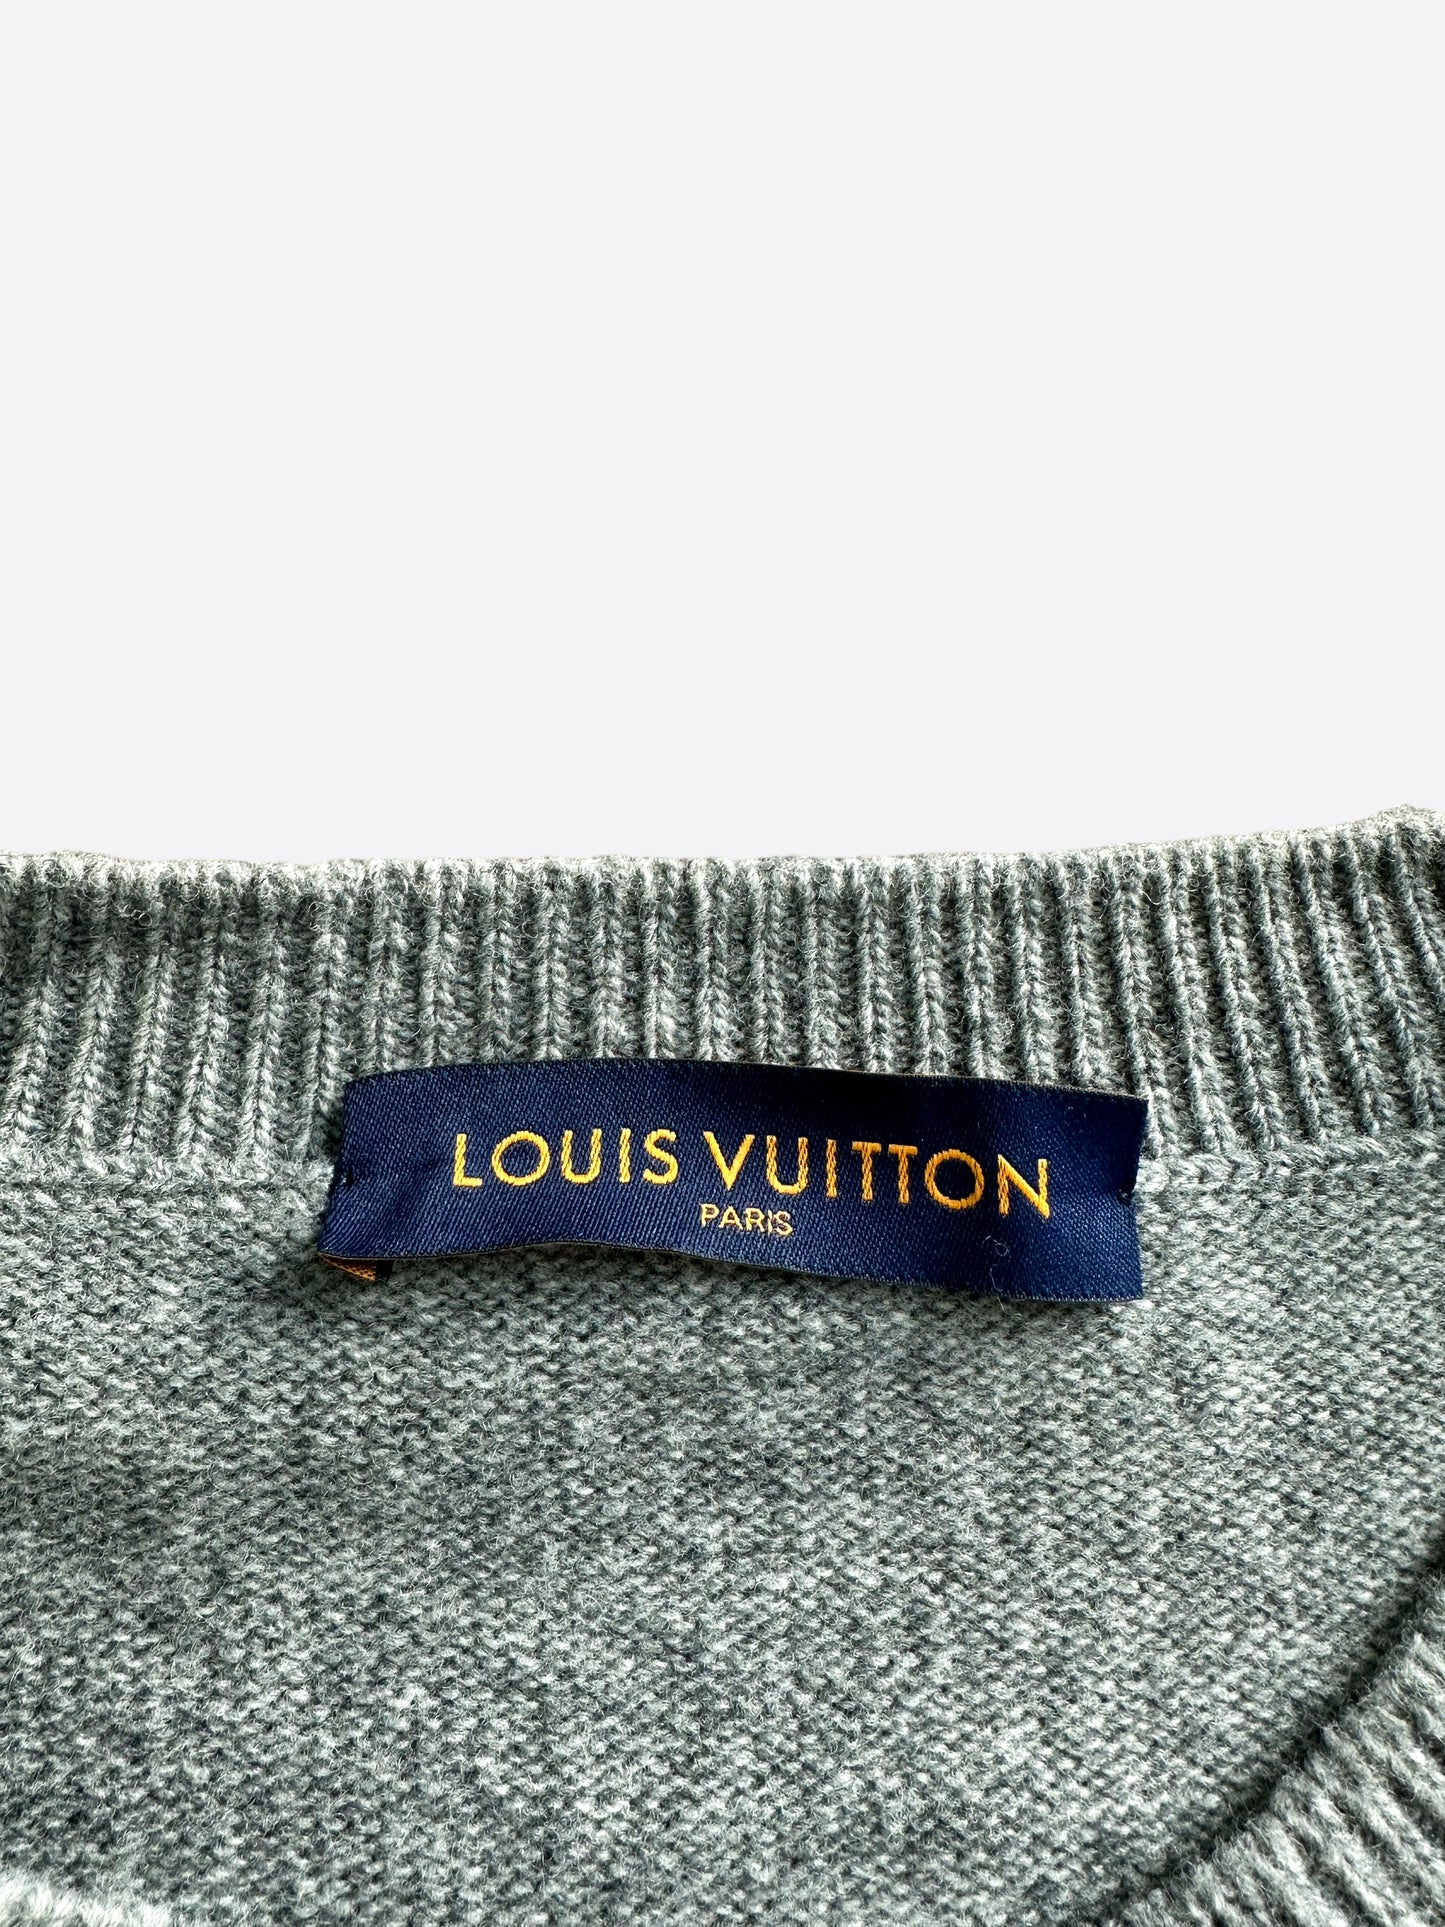 Louis Vuitton 2022 Tiger Intarsia Pullover w/ Tags - Grey Sweaters,  Clothing - LOU580562